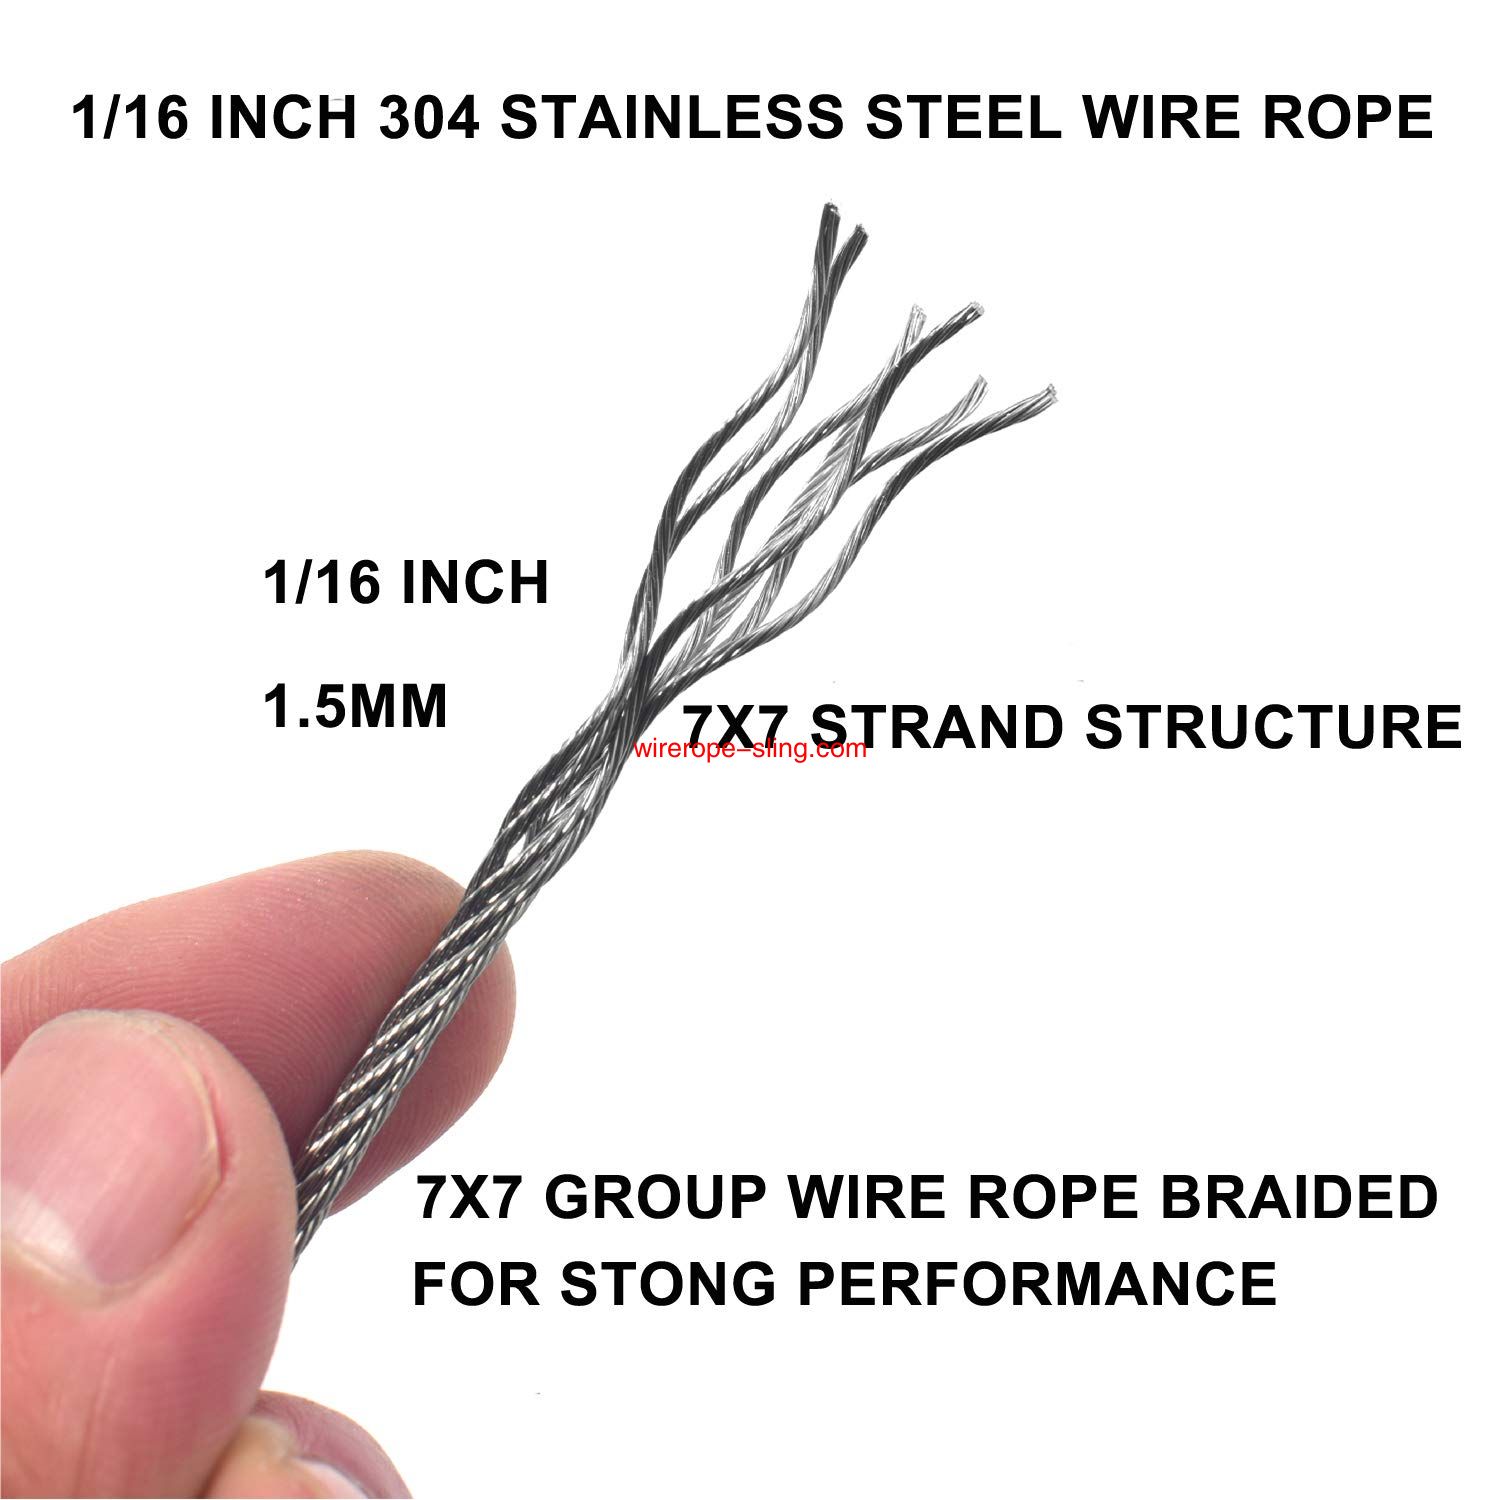 1/16 Inch Vinyl Coated Wire Rope Kit,3300 Ελαφρύ σύρμα Stainless Steel 304 Wire Rope με 50 PCS Criminum Crimping Loop και 10 PCS Clamps